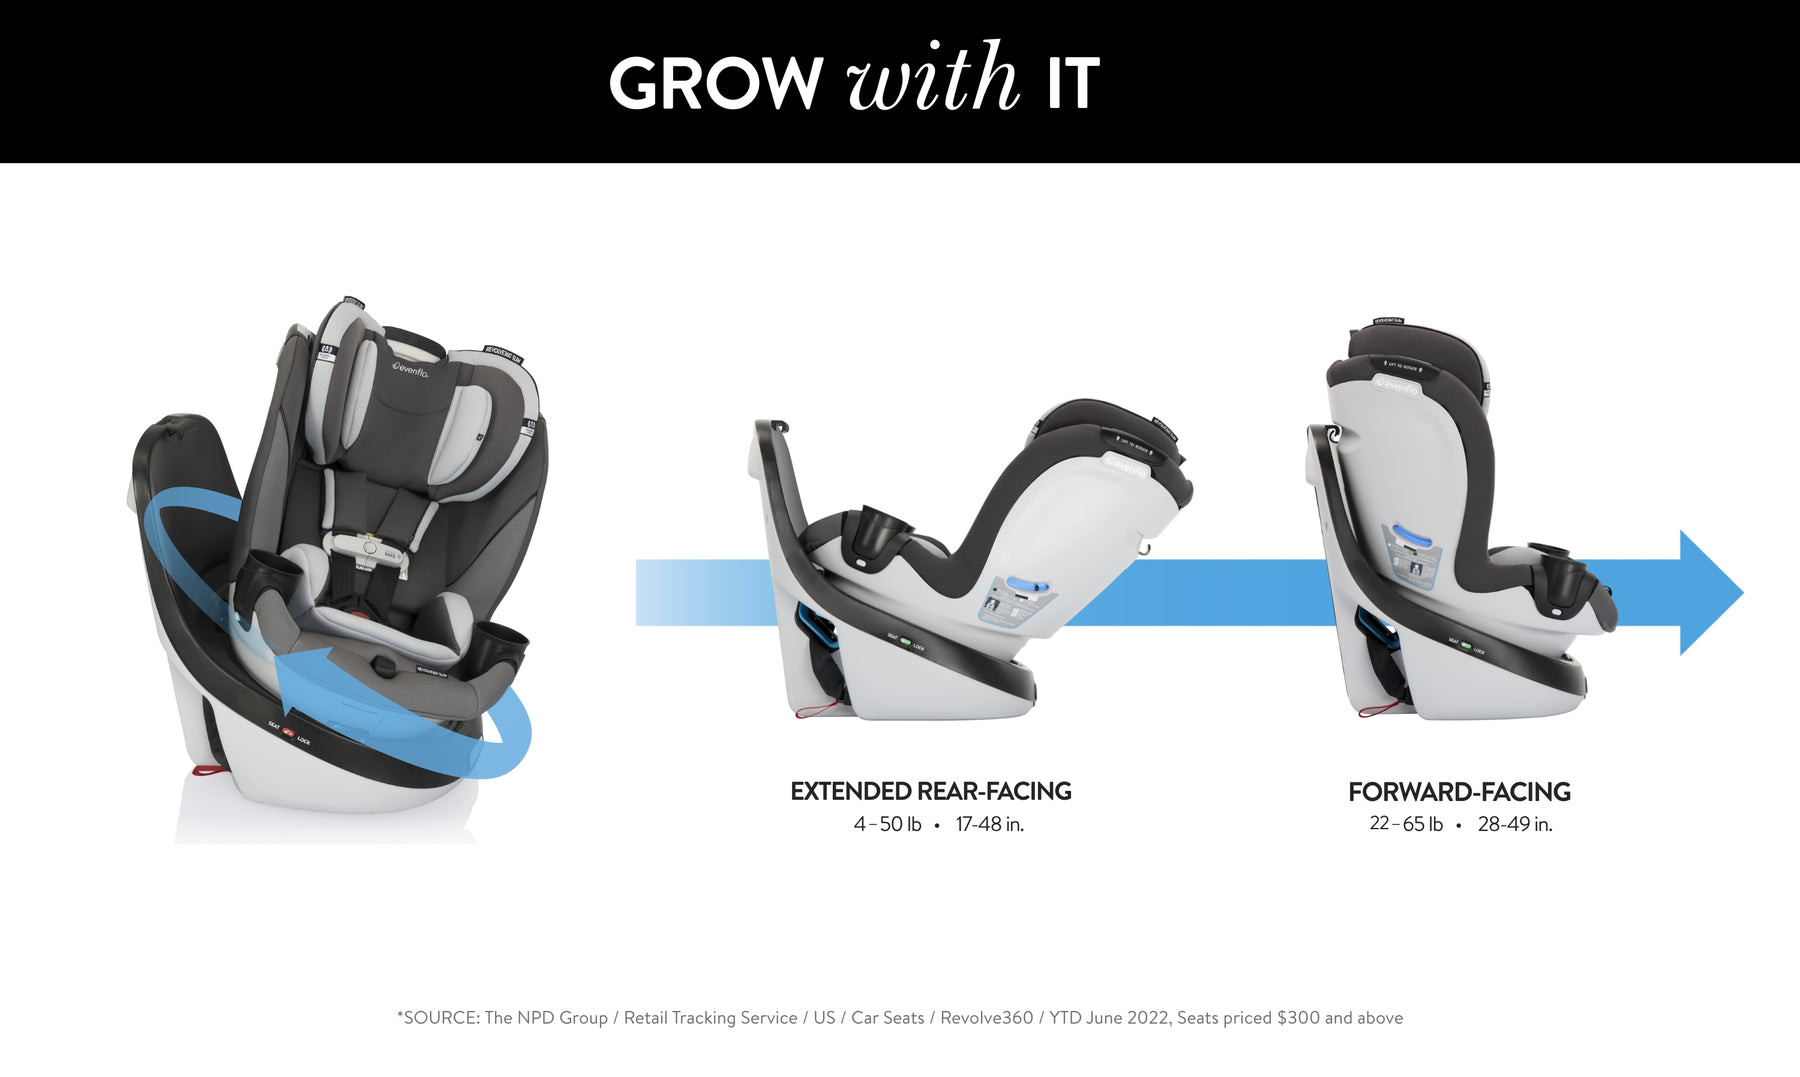 Grow with IT. Image of Revolve360 Slim with arrow indicating rotational feature. Image of extended rear-facing car seat, 4 to 50 pounds, 17 to 48 inches. Image of forward-facing car seat, 22 to 65 pounds, 28 to 49 inches.